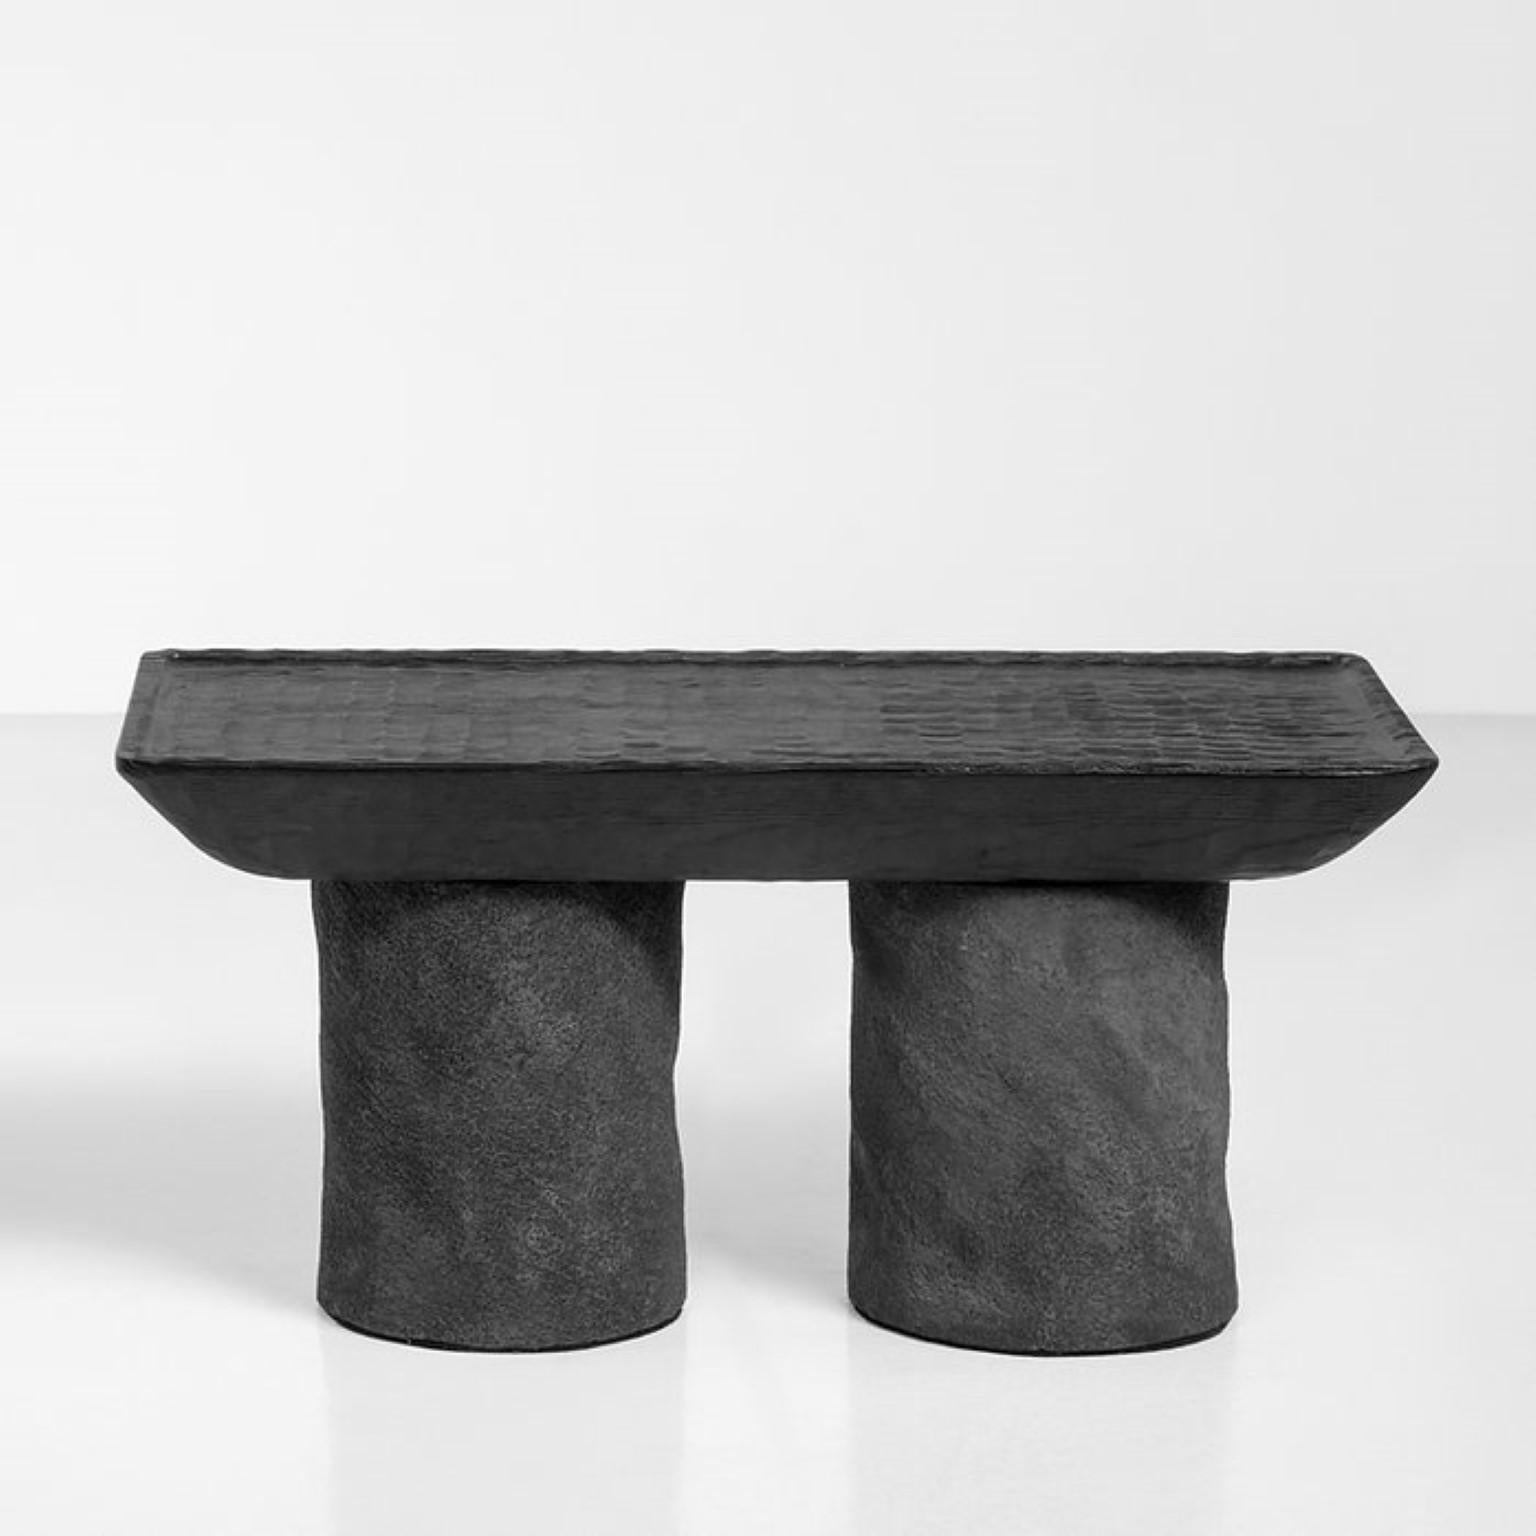 Small Korotun coffee table by Faina
Design: Victoriya Yakusha
Materials: Clay, Wood
Dimensions: W 65 x D 32 x H 30 cm

Almost carved in stone, minimalist coffee table with sharp outlines has sturdy character. With its authentic features KOROTUN